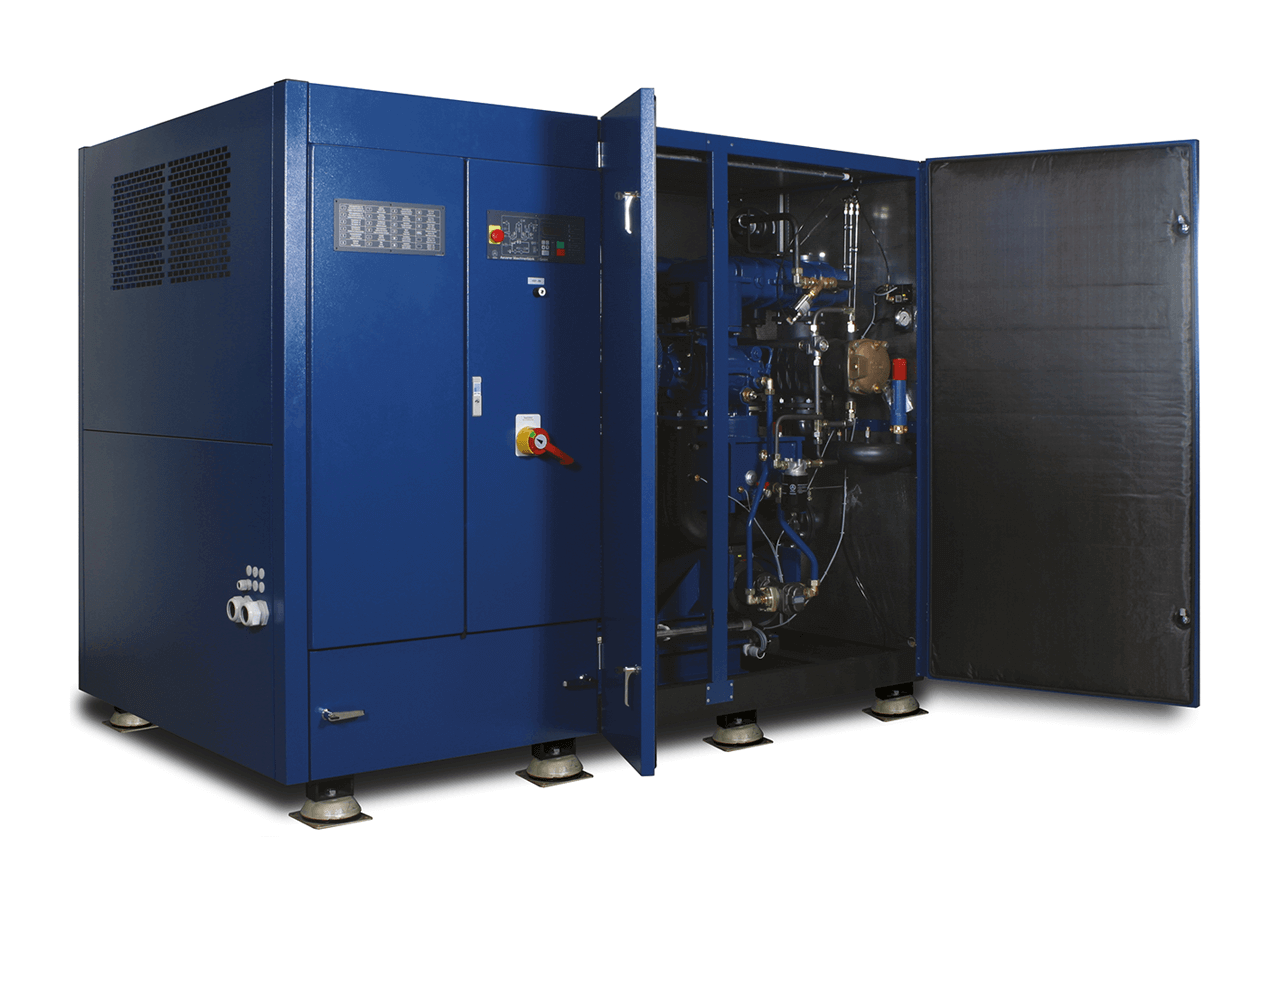 Picture of the new compressed air compressor series DELTA TWIN